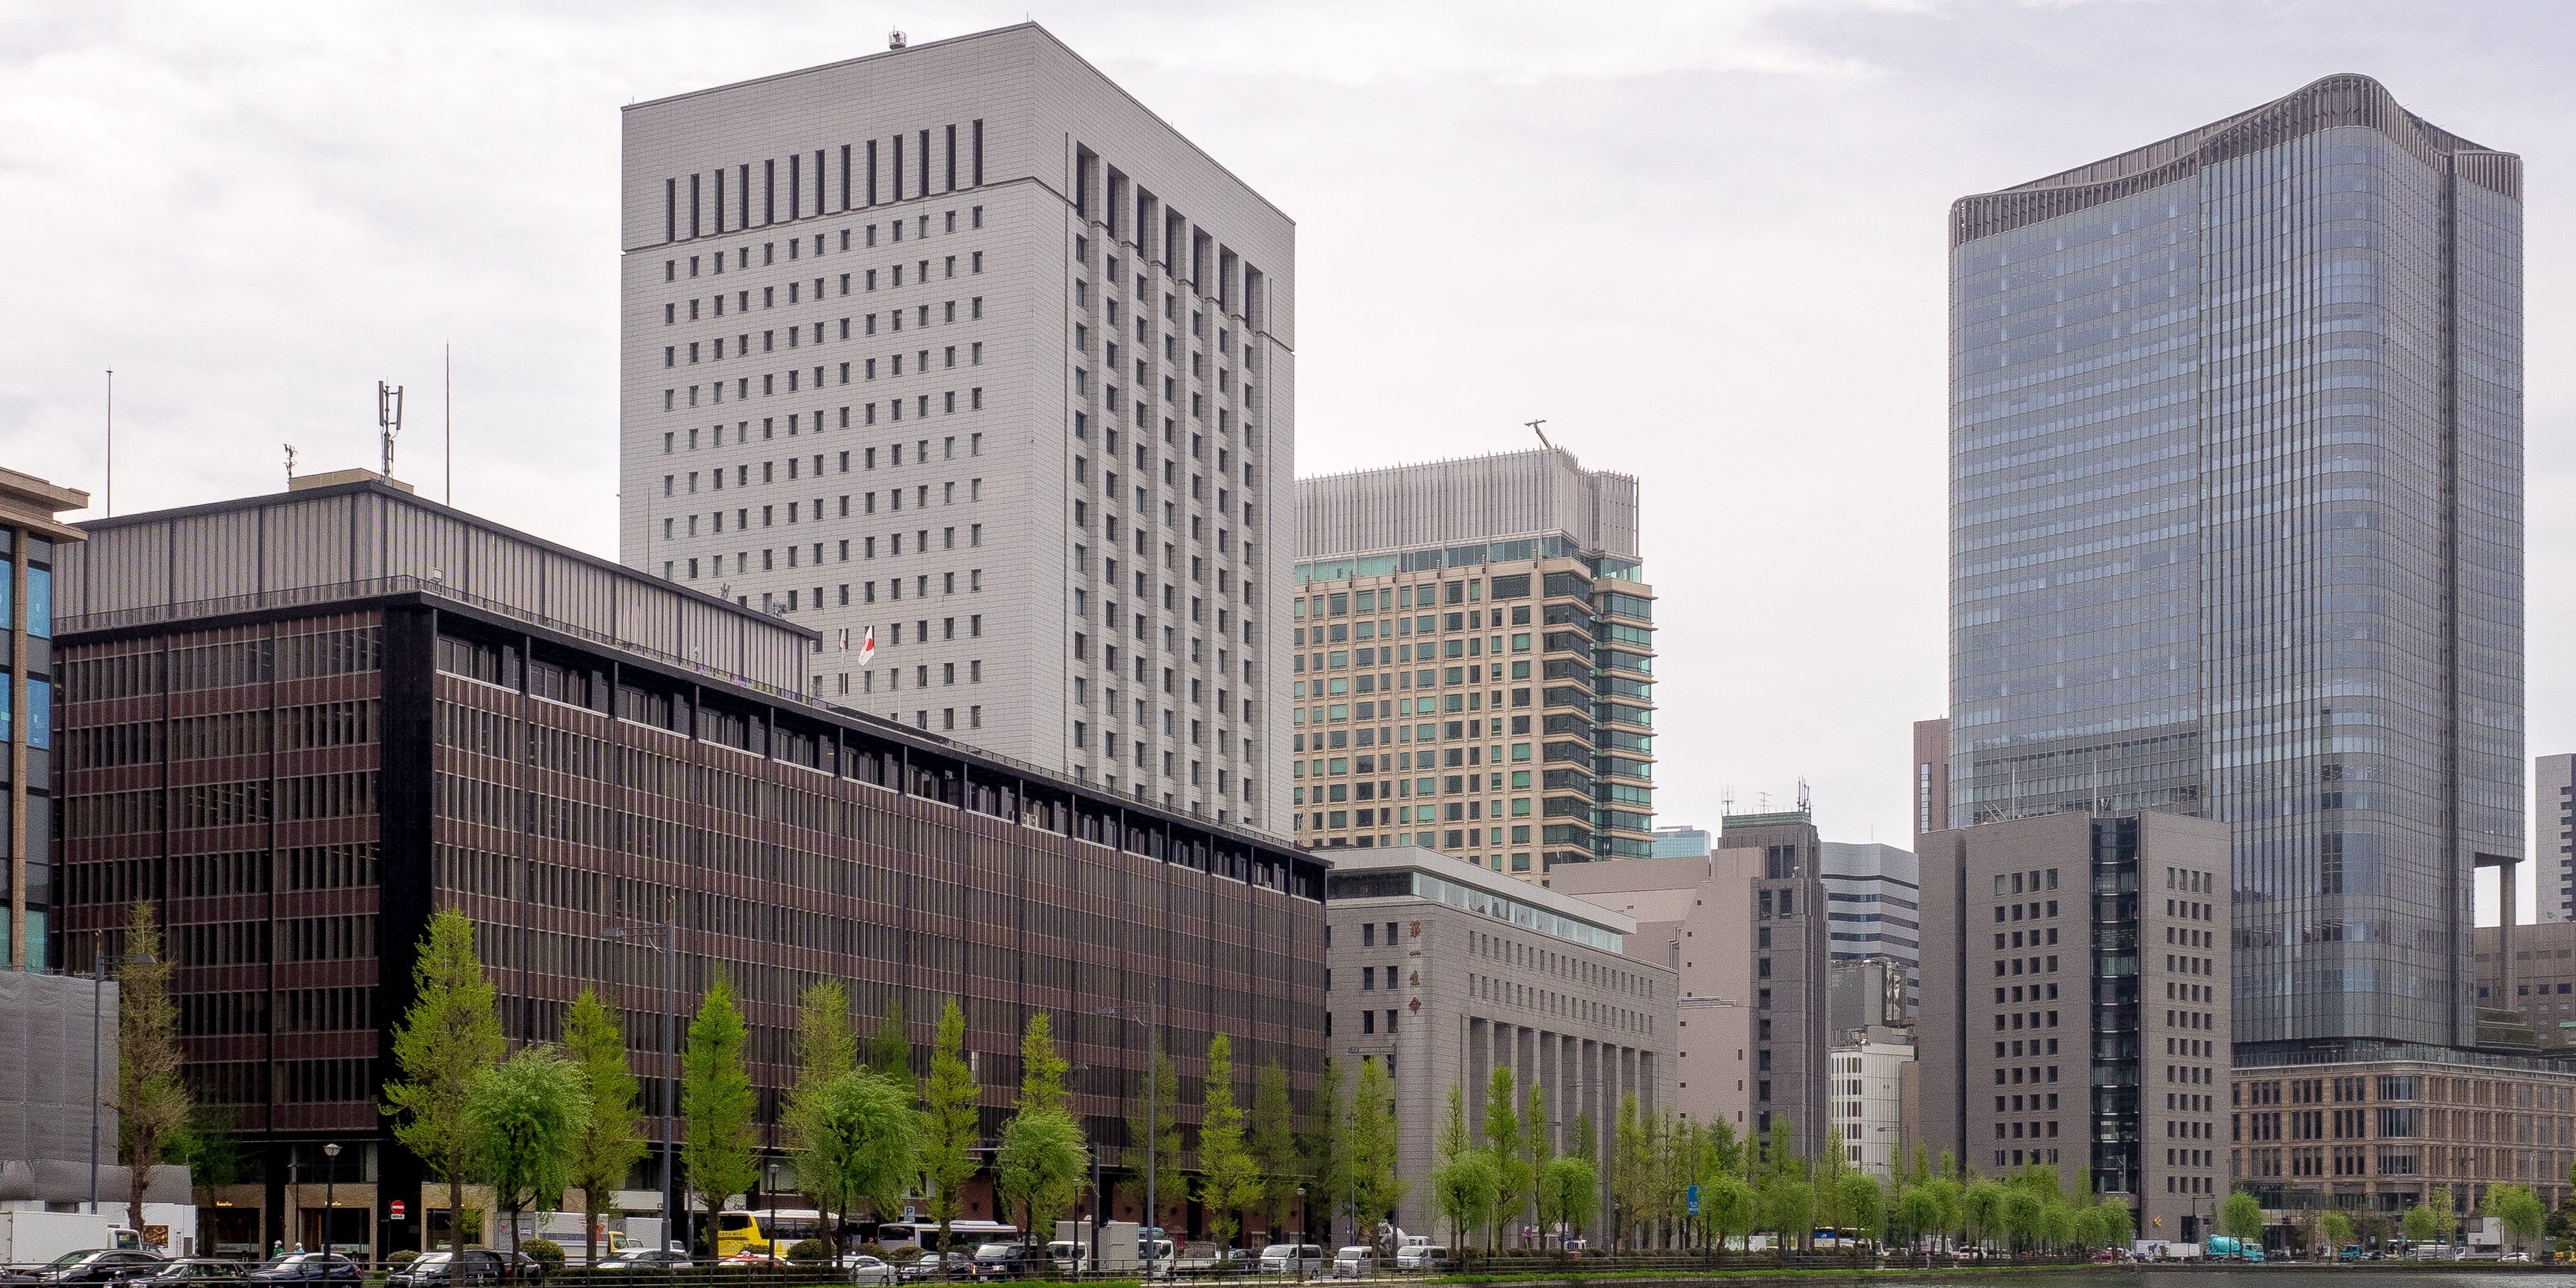 The Marunouchi District in Tokyo, Japan, which Saffron City in Pokemon is based on